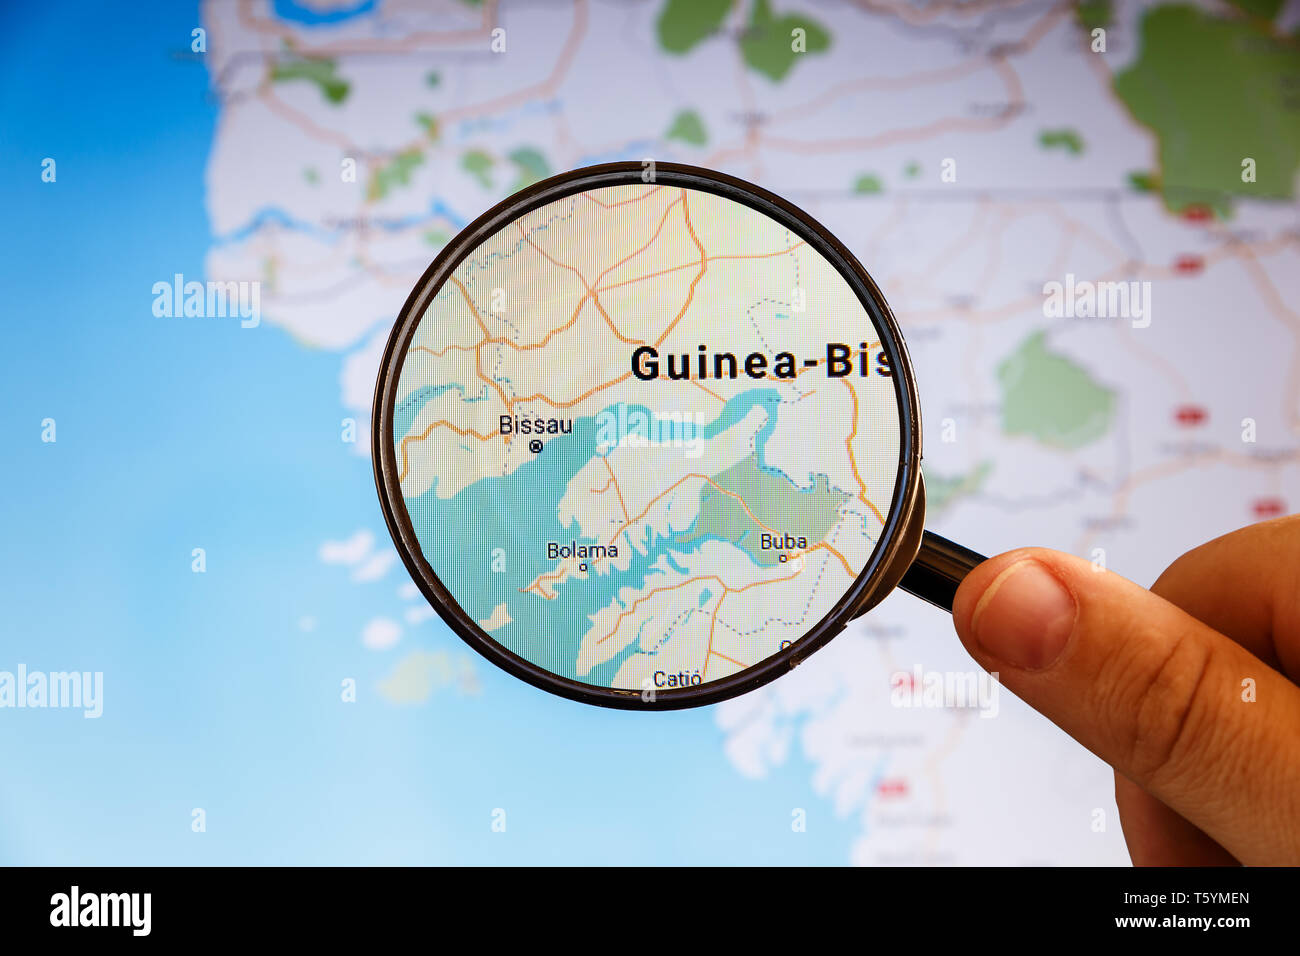 Bissau, Guinea-Bissau. Political map. City visualization illustrative concept on display screen through magnifying glass in the hand. Stock Photo